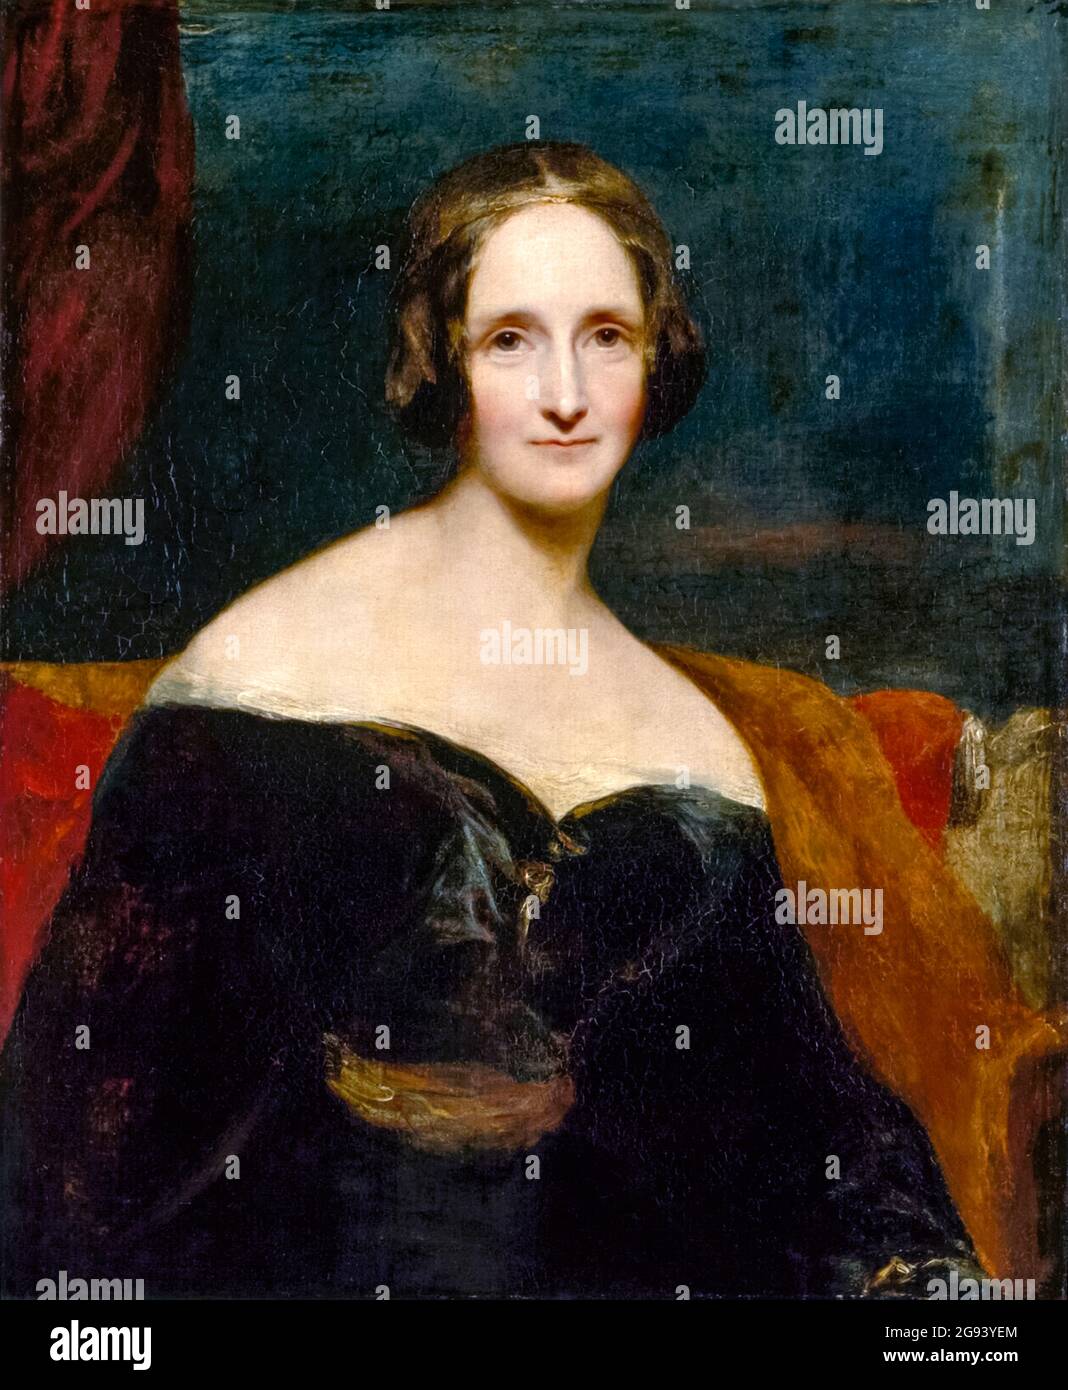 Mary Shelley (1797-1851) writer best remembered for her bestselling Gothic novel ‘Frankenstein; or, The Modern Prometheus’ first published in 1818 about a young scientist who gives life to a Creature made from the parts of dead human bodies. Photograph of an 1840 oil painting by Irish artist Richard Rothwell (1800-1868) painted in 1840. Stock Photo